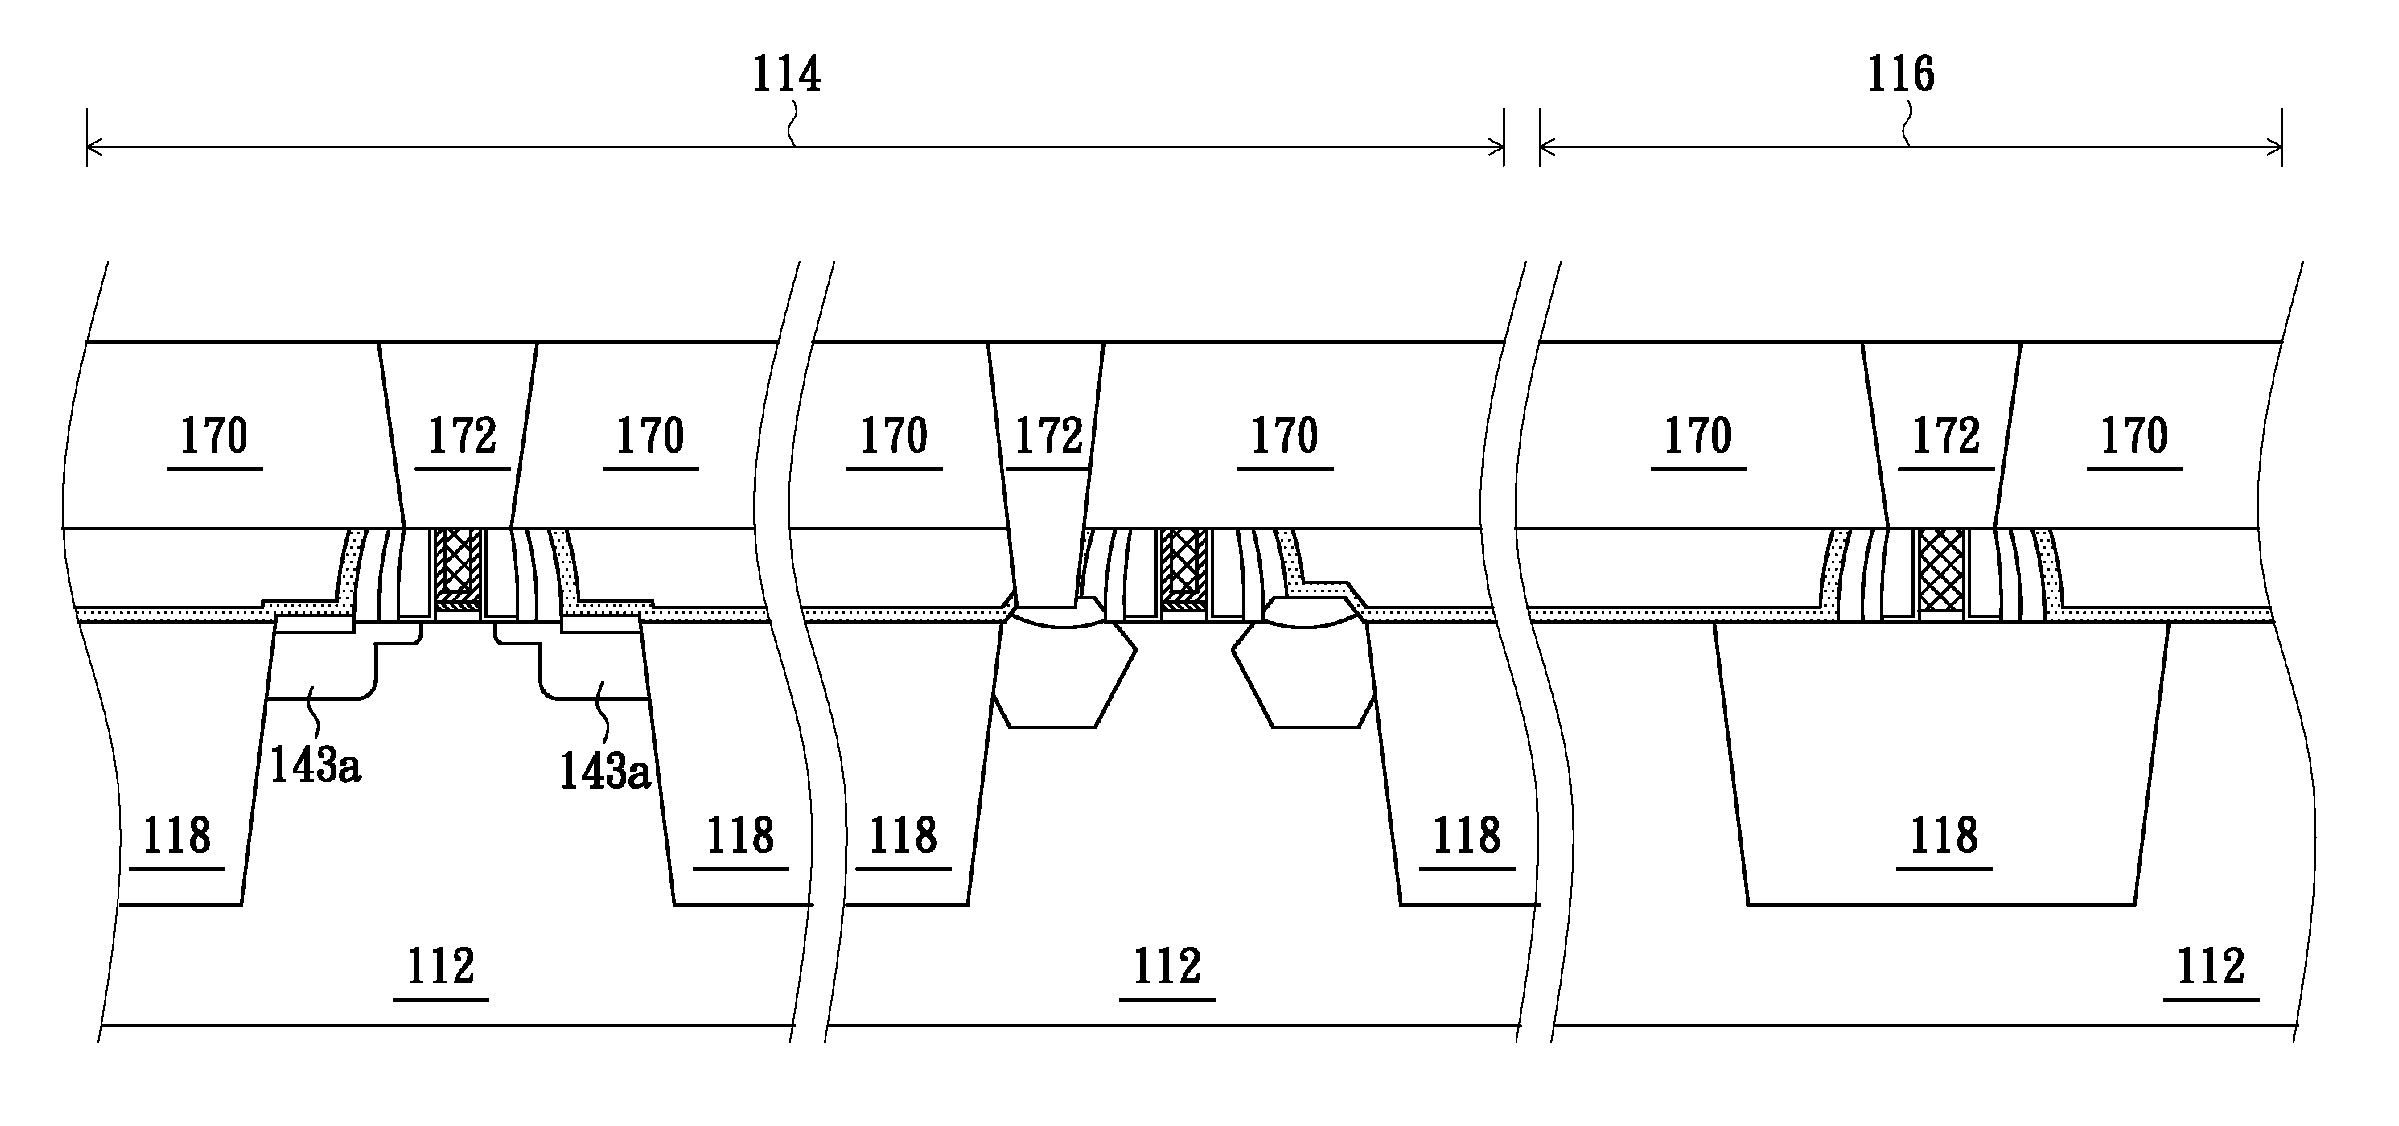 Method of forming an electrical fuse and a metal gate transistor and the related electrical fuse